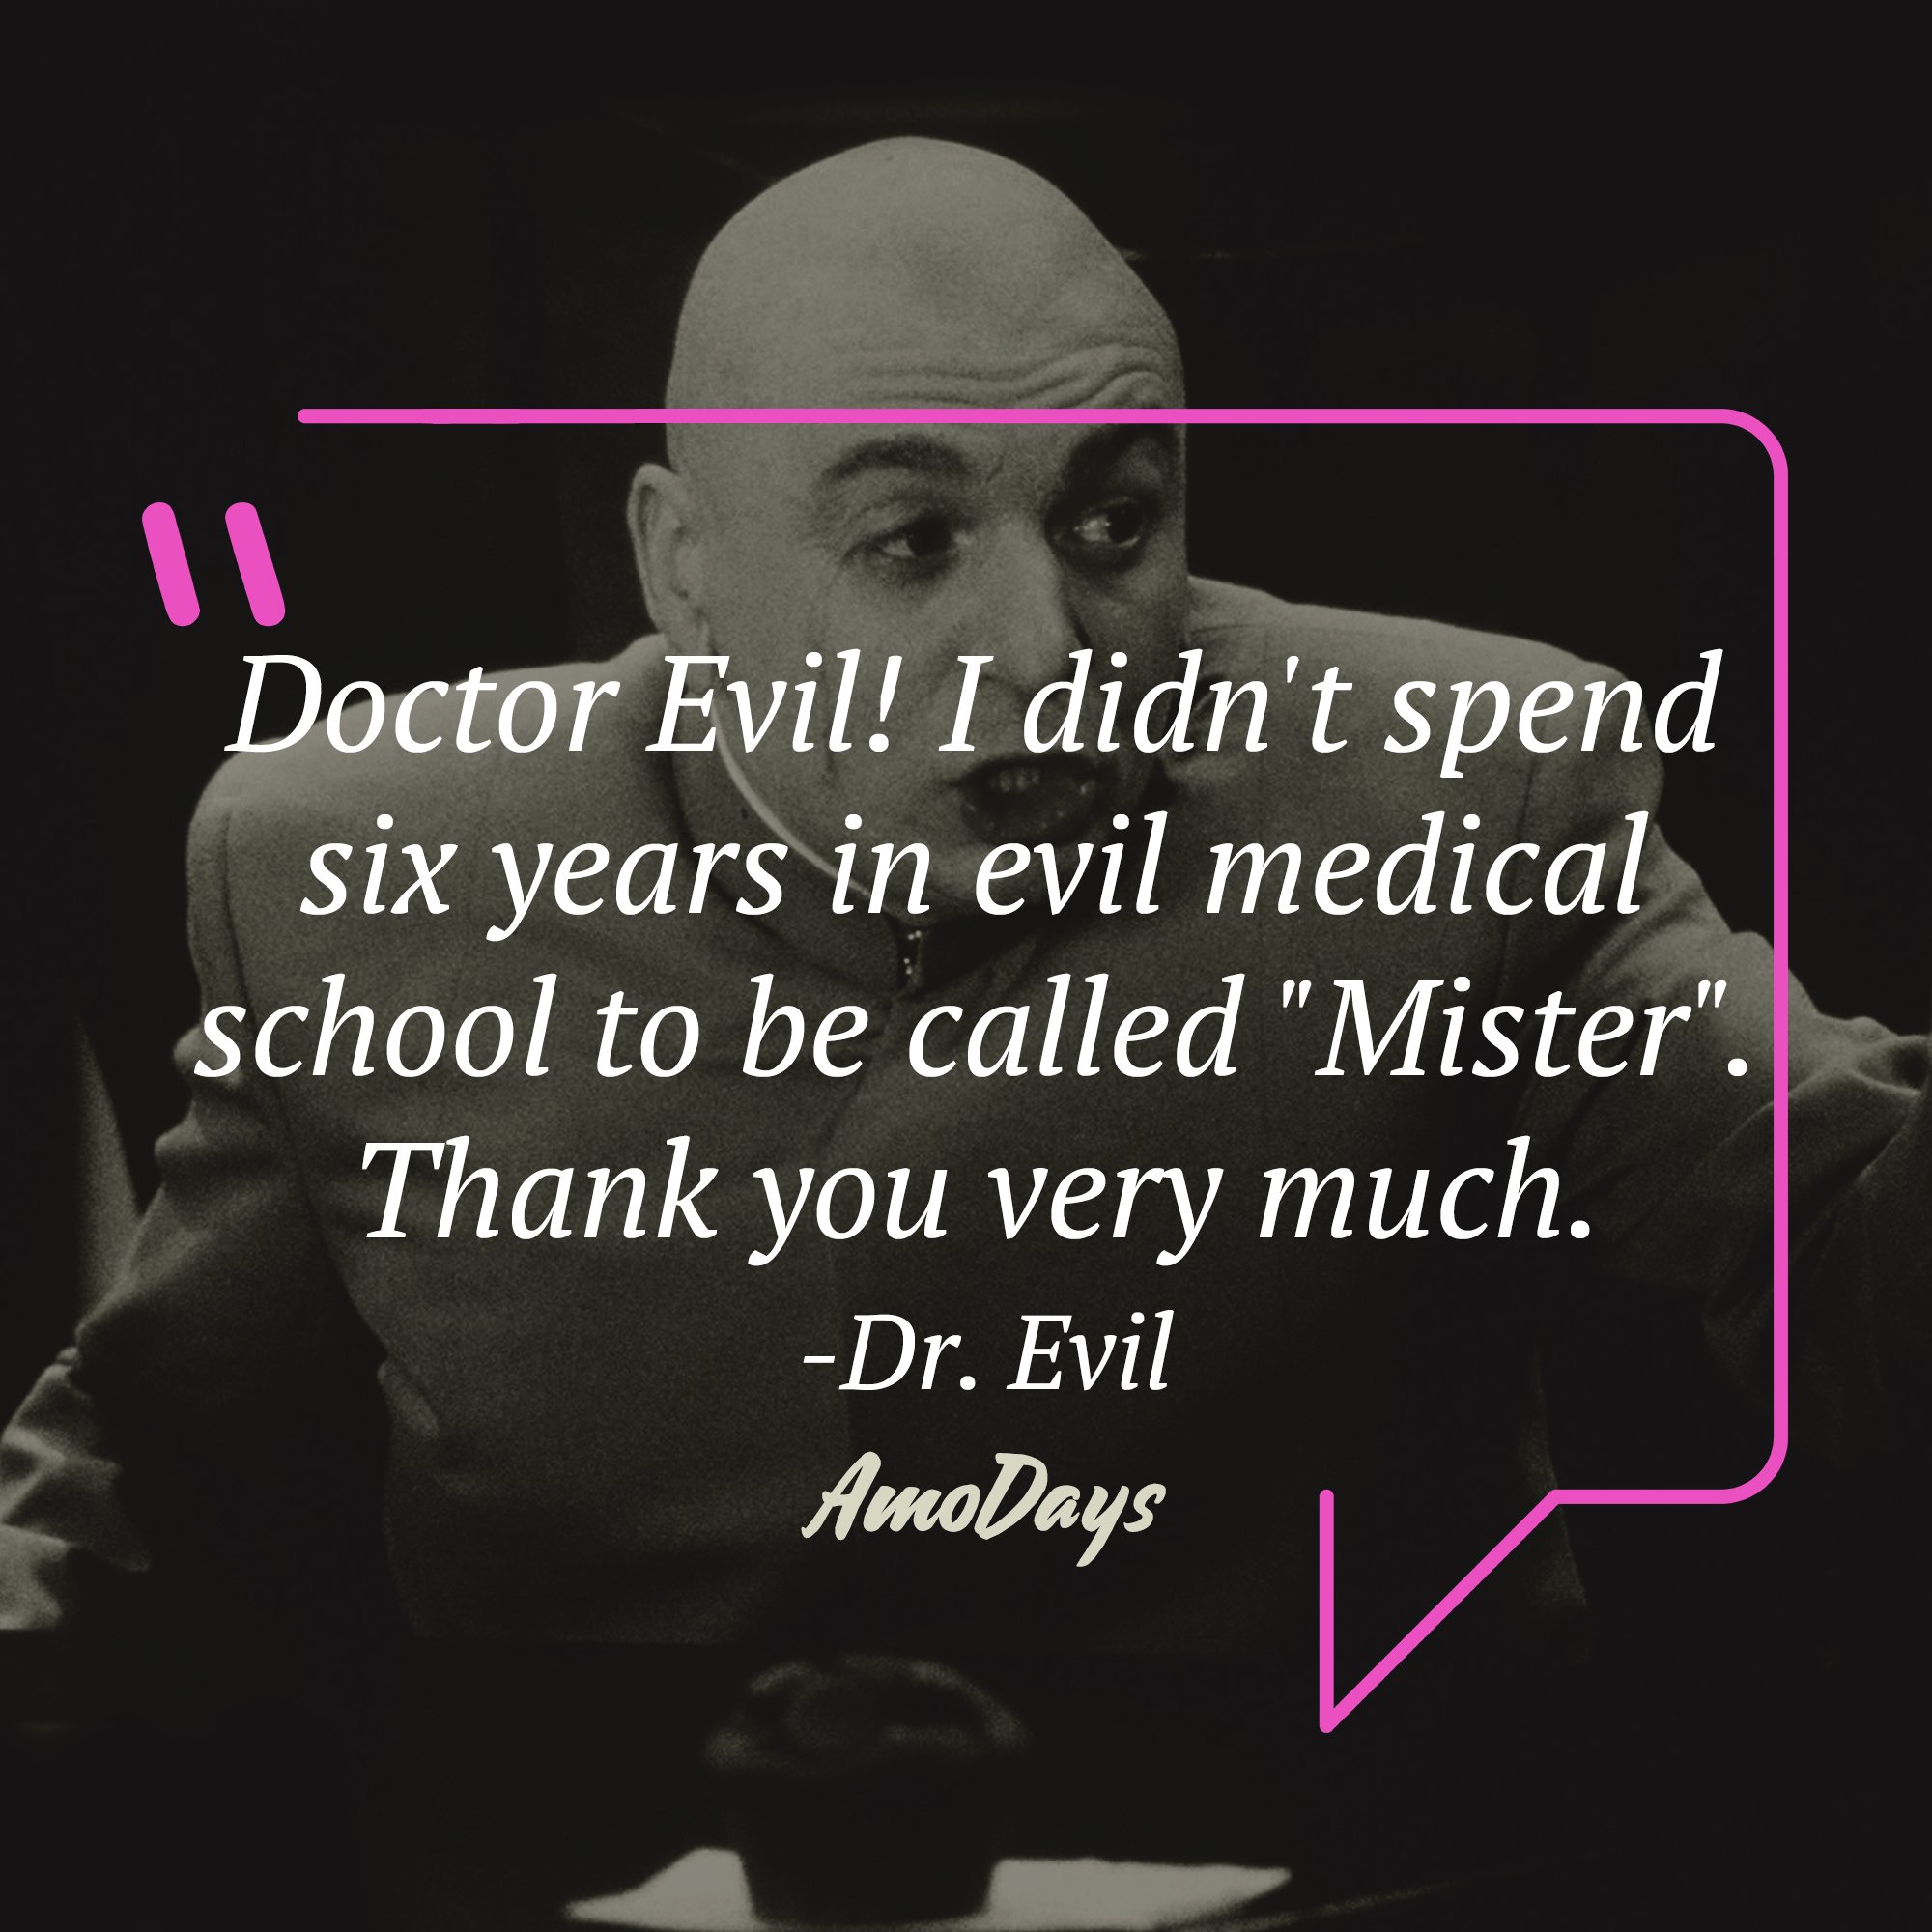 Dr. Evil's quote: "Doctor" Evil! I didn't spend six years in evil medical school to be called "Mister." Thank you very much.” | Image: AmoDays